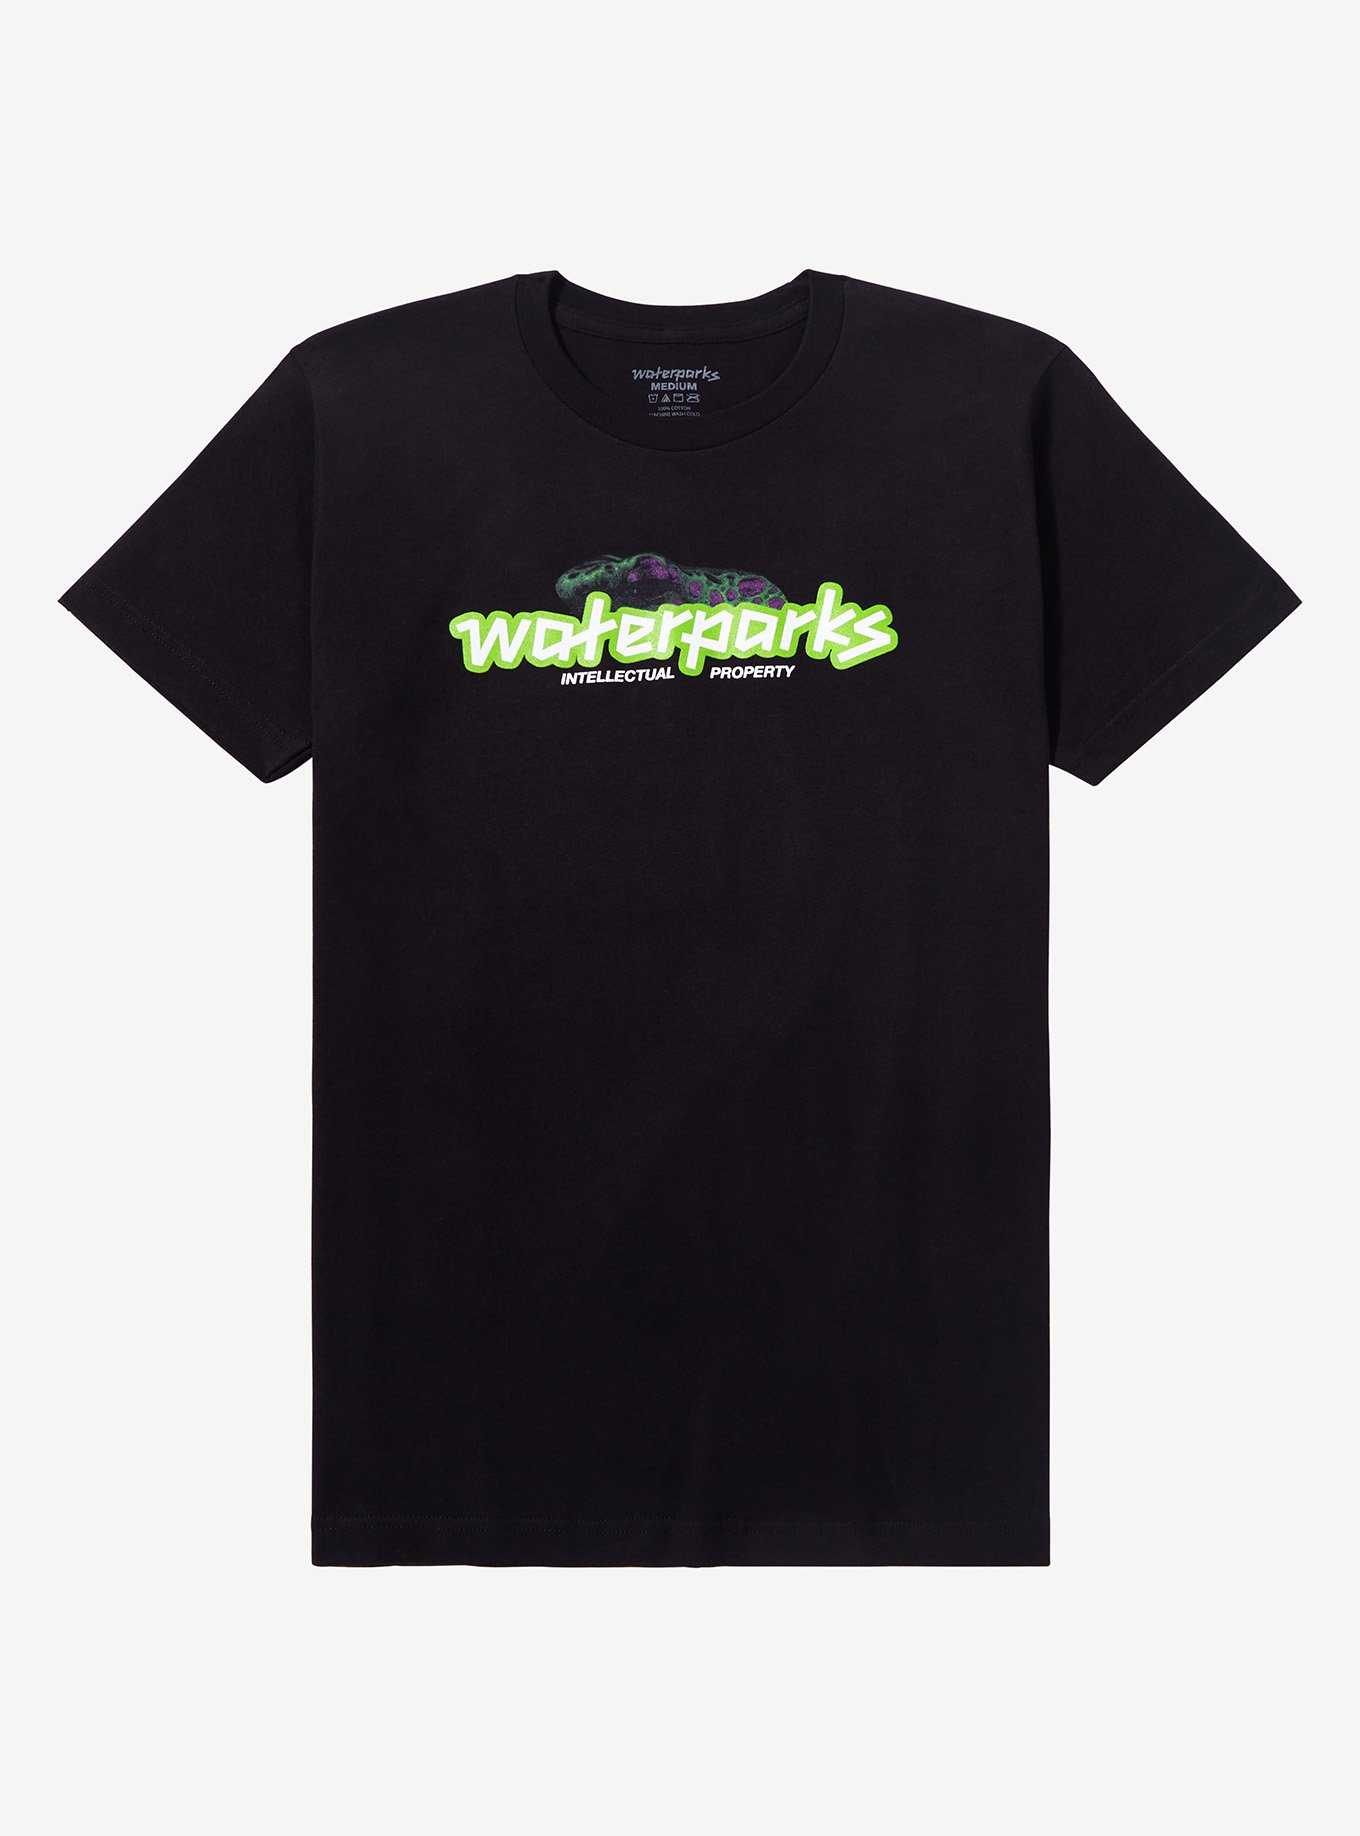 Waterparks Intellectual Property Frog T-Shirt, , hi-res